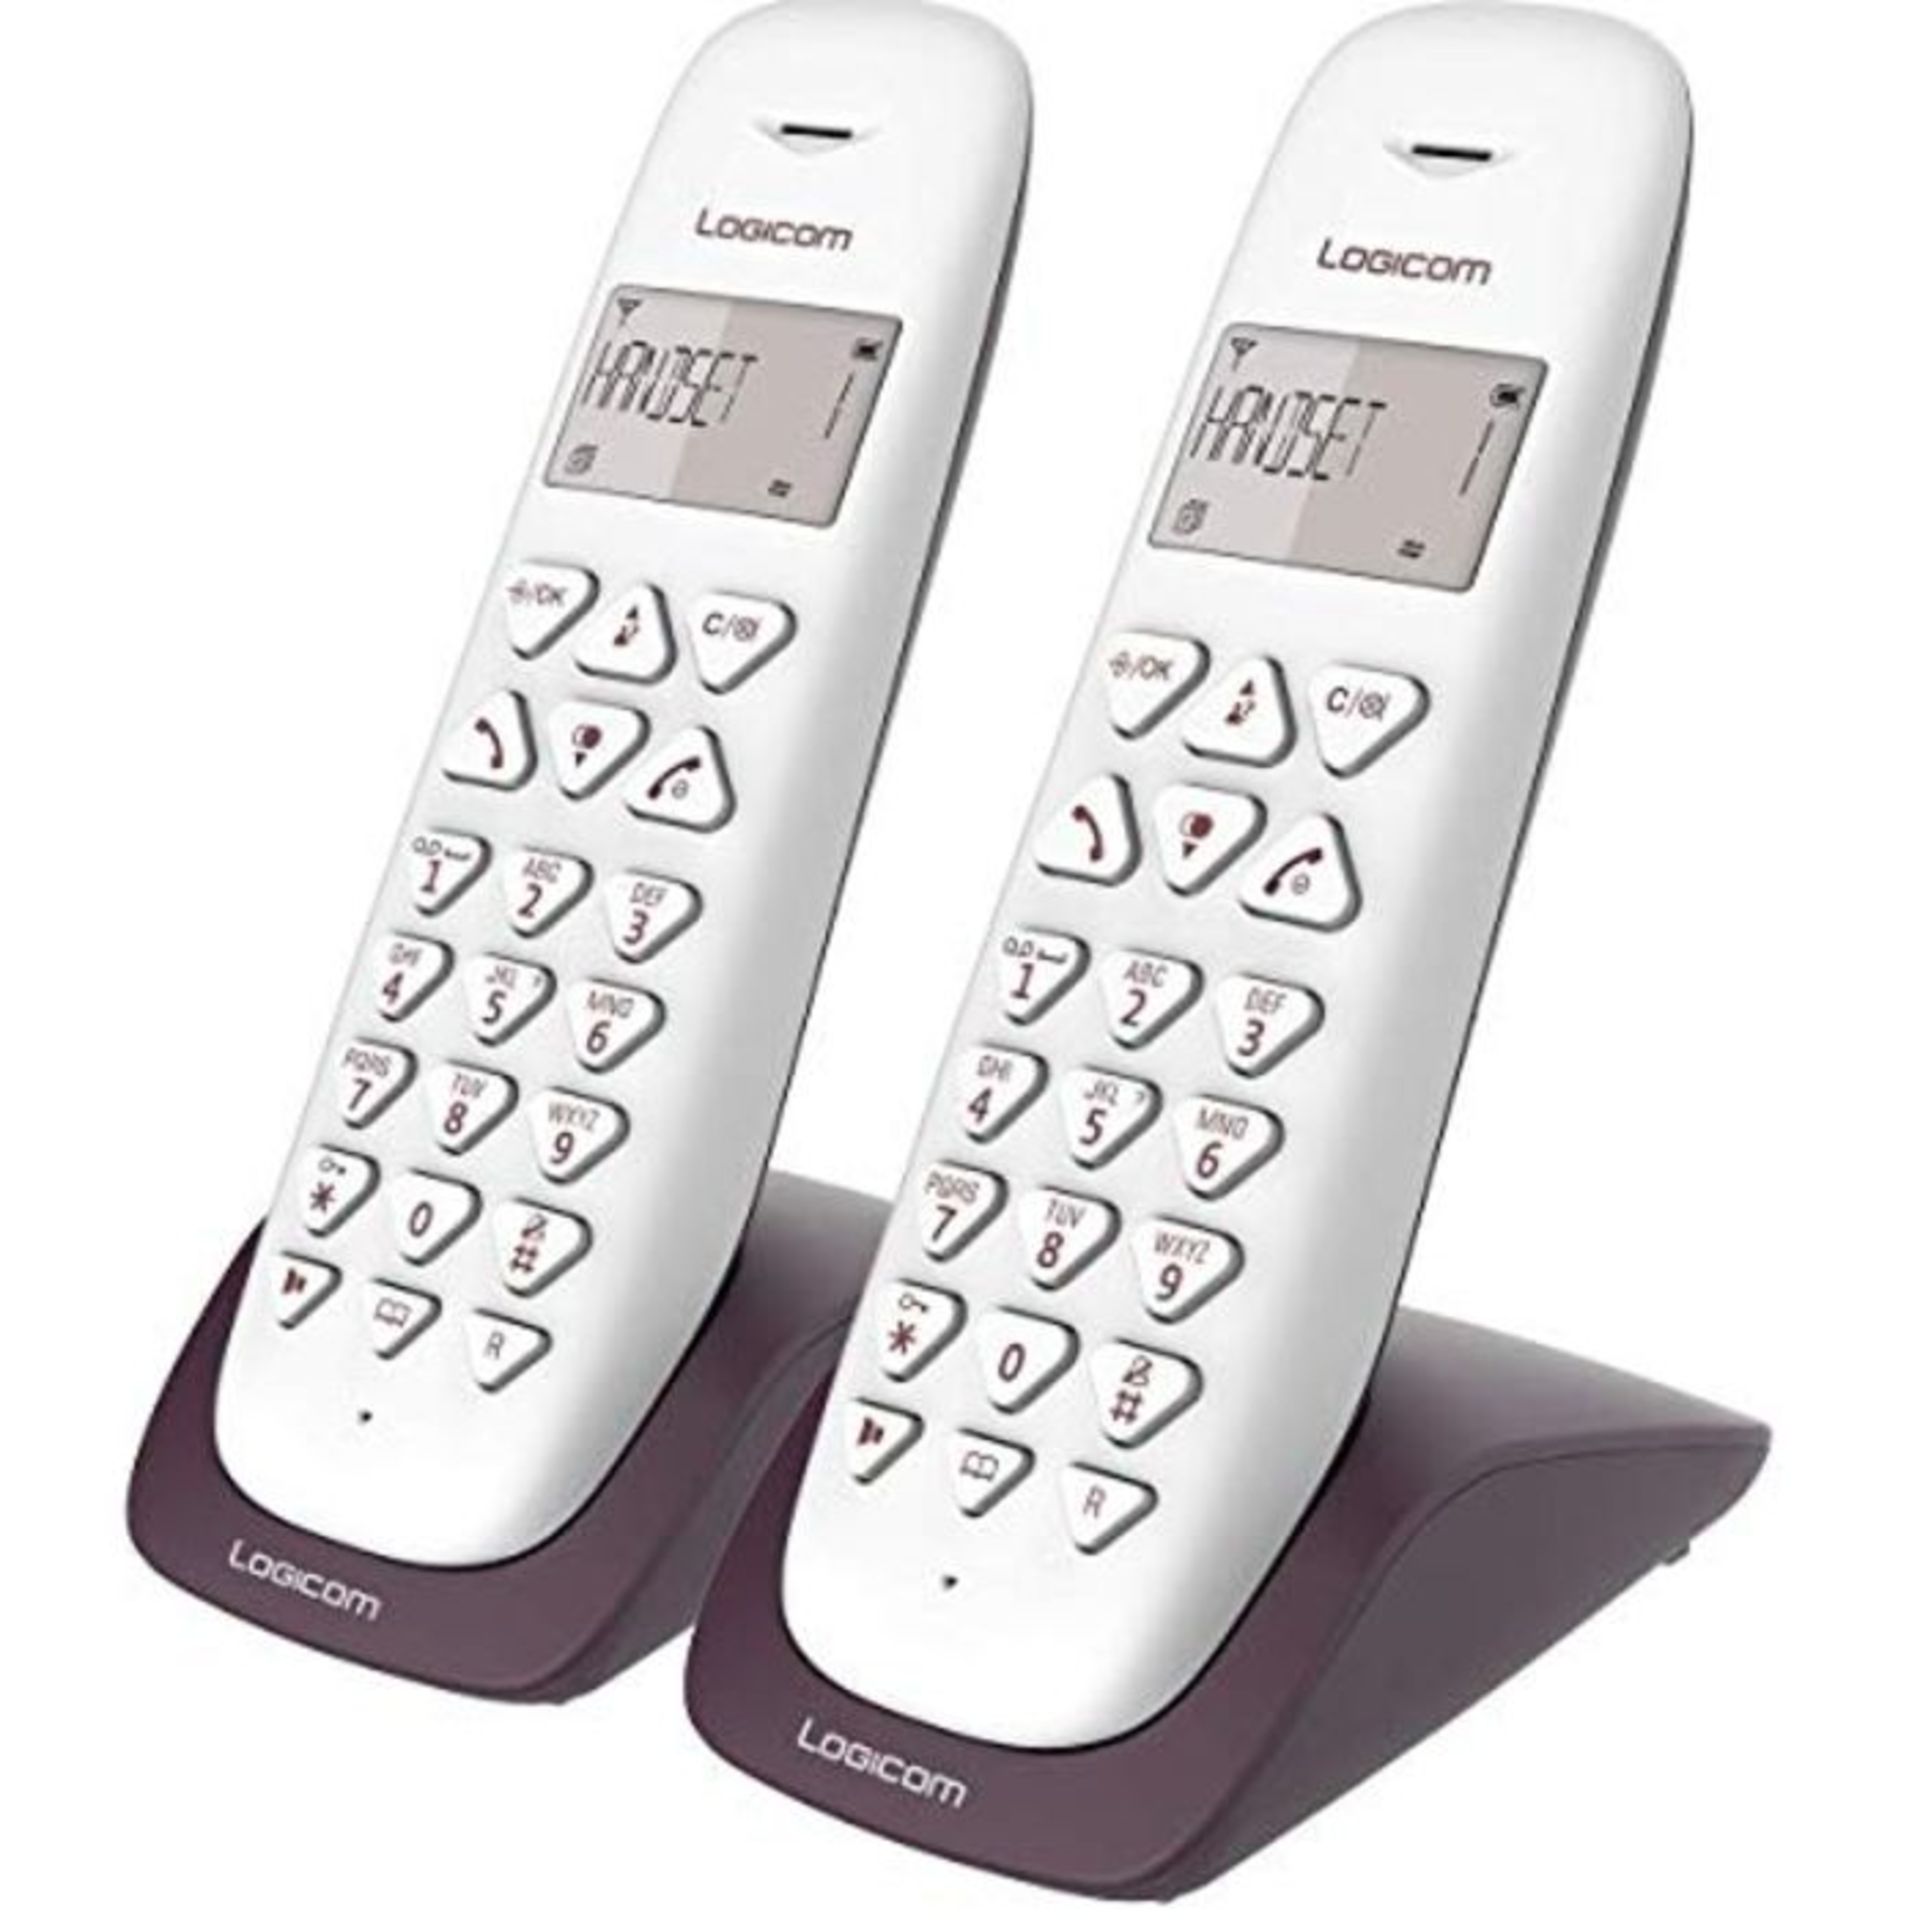 Fixed Wireless Telephone - San Voicemail - Duo - Analogue Phones and DECT - Logicom Ve